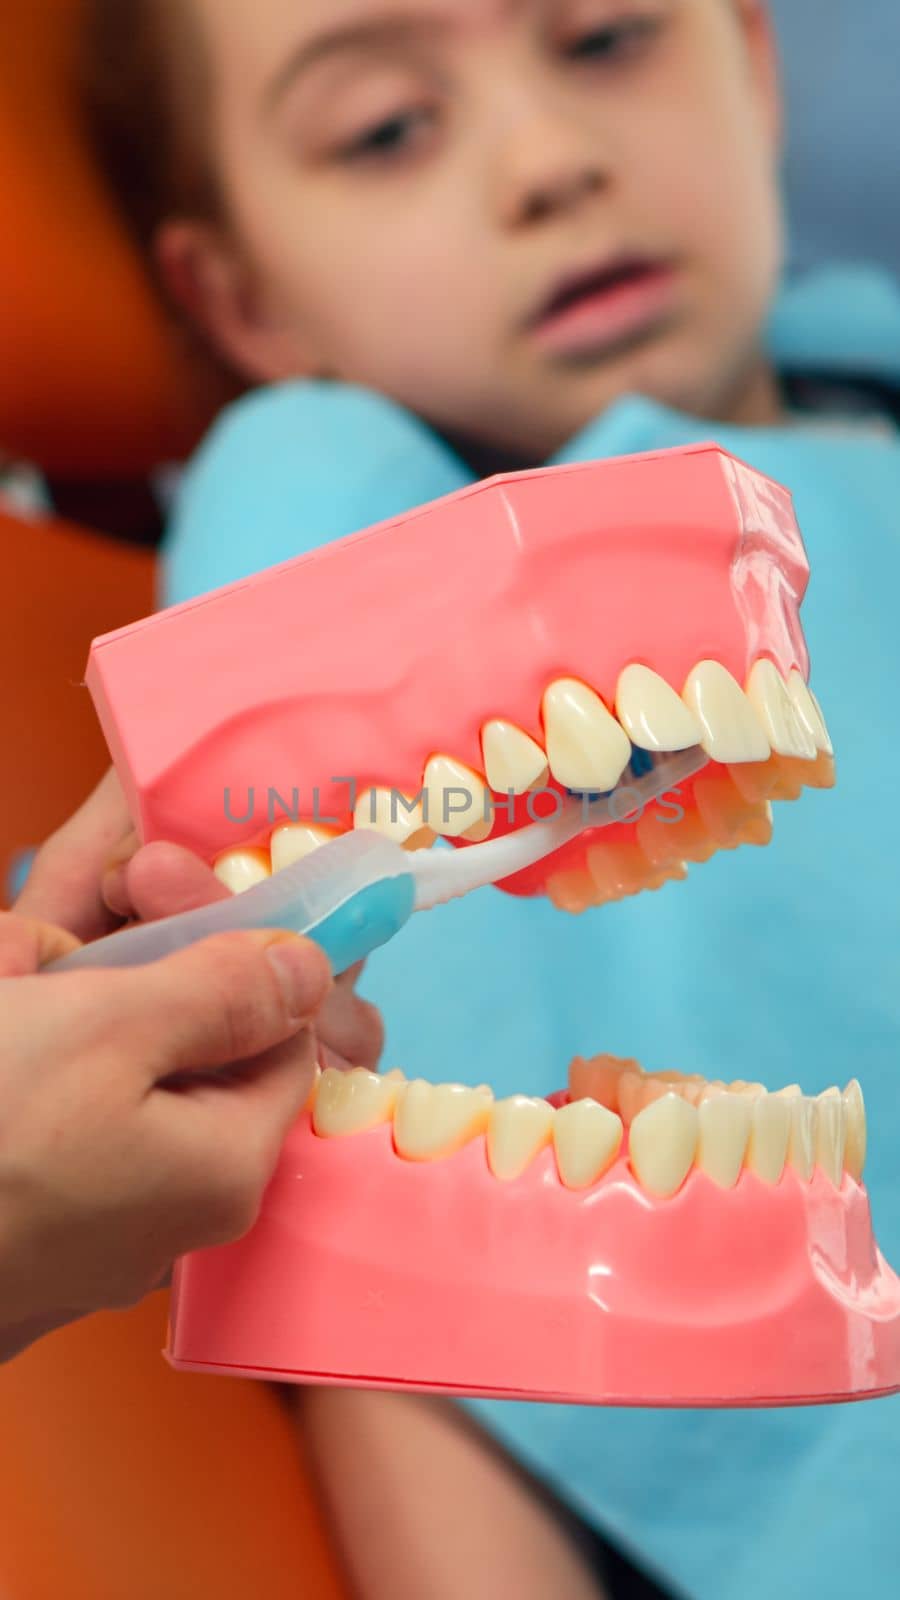 Pediatric dentist showing the correct dental hygiene using mock-up of skeleton of teeth. Stomatologist doctor explaining proper dental hygiene to patient holding sample of human jaw with toothbrush.